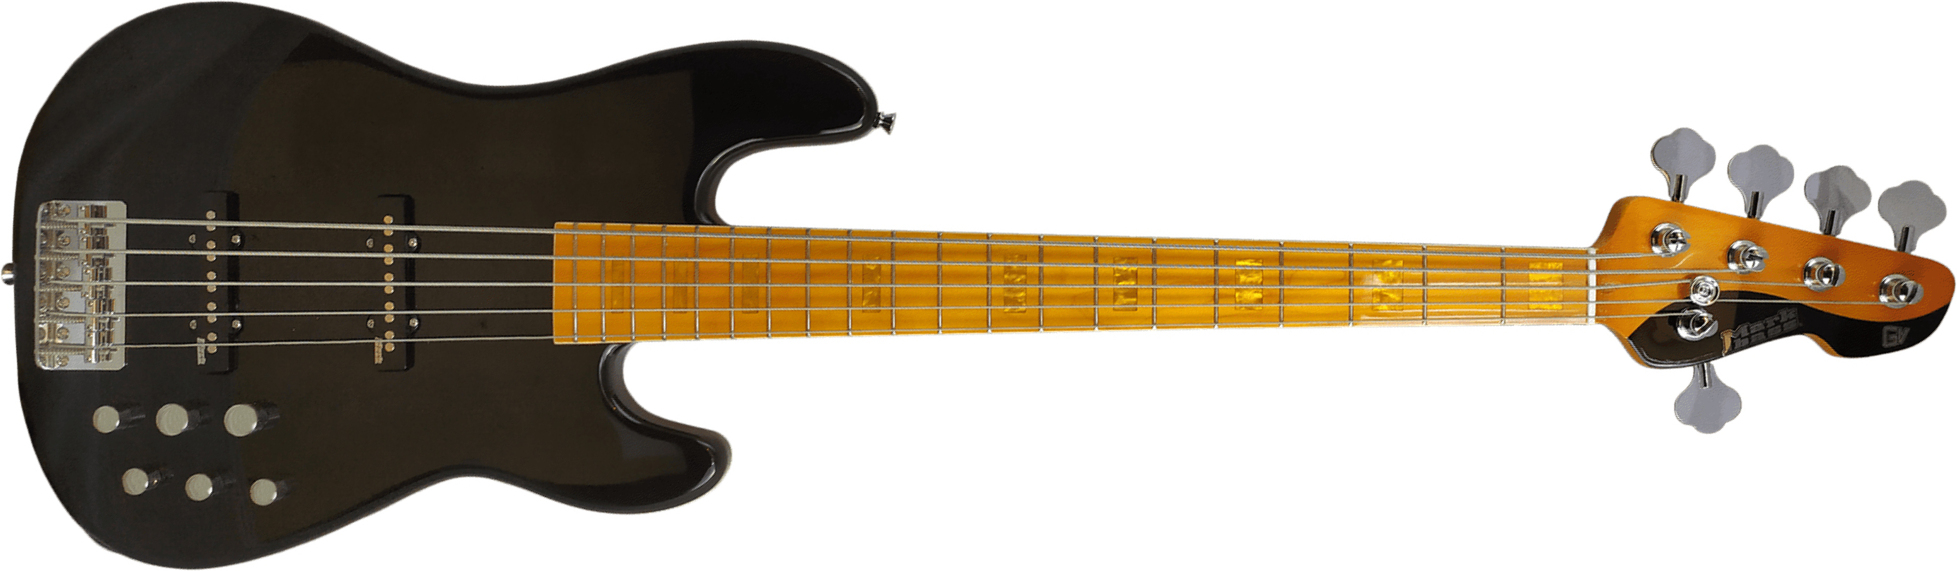 Markbass Mb Gv 5 Gloxy Val Cr Mp 5c Active Mn - Black - Solid body elektrische bas - Main picture